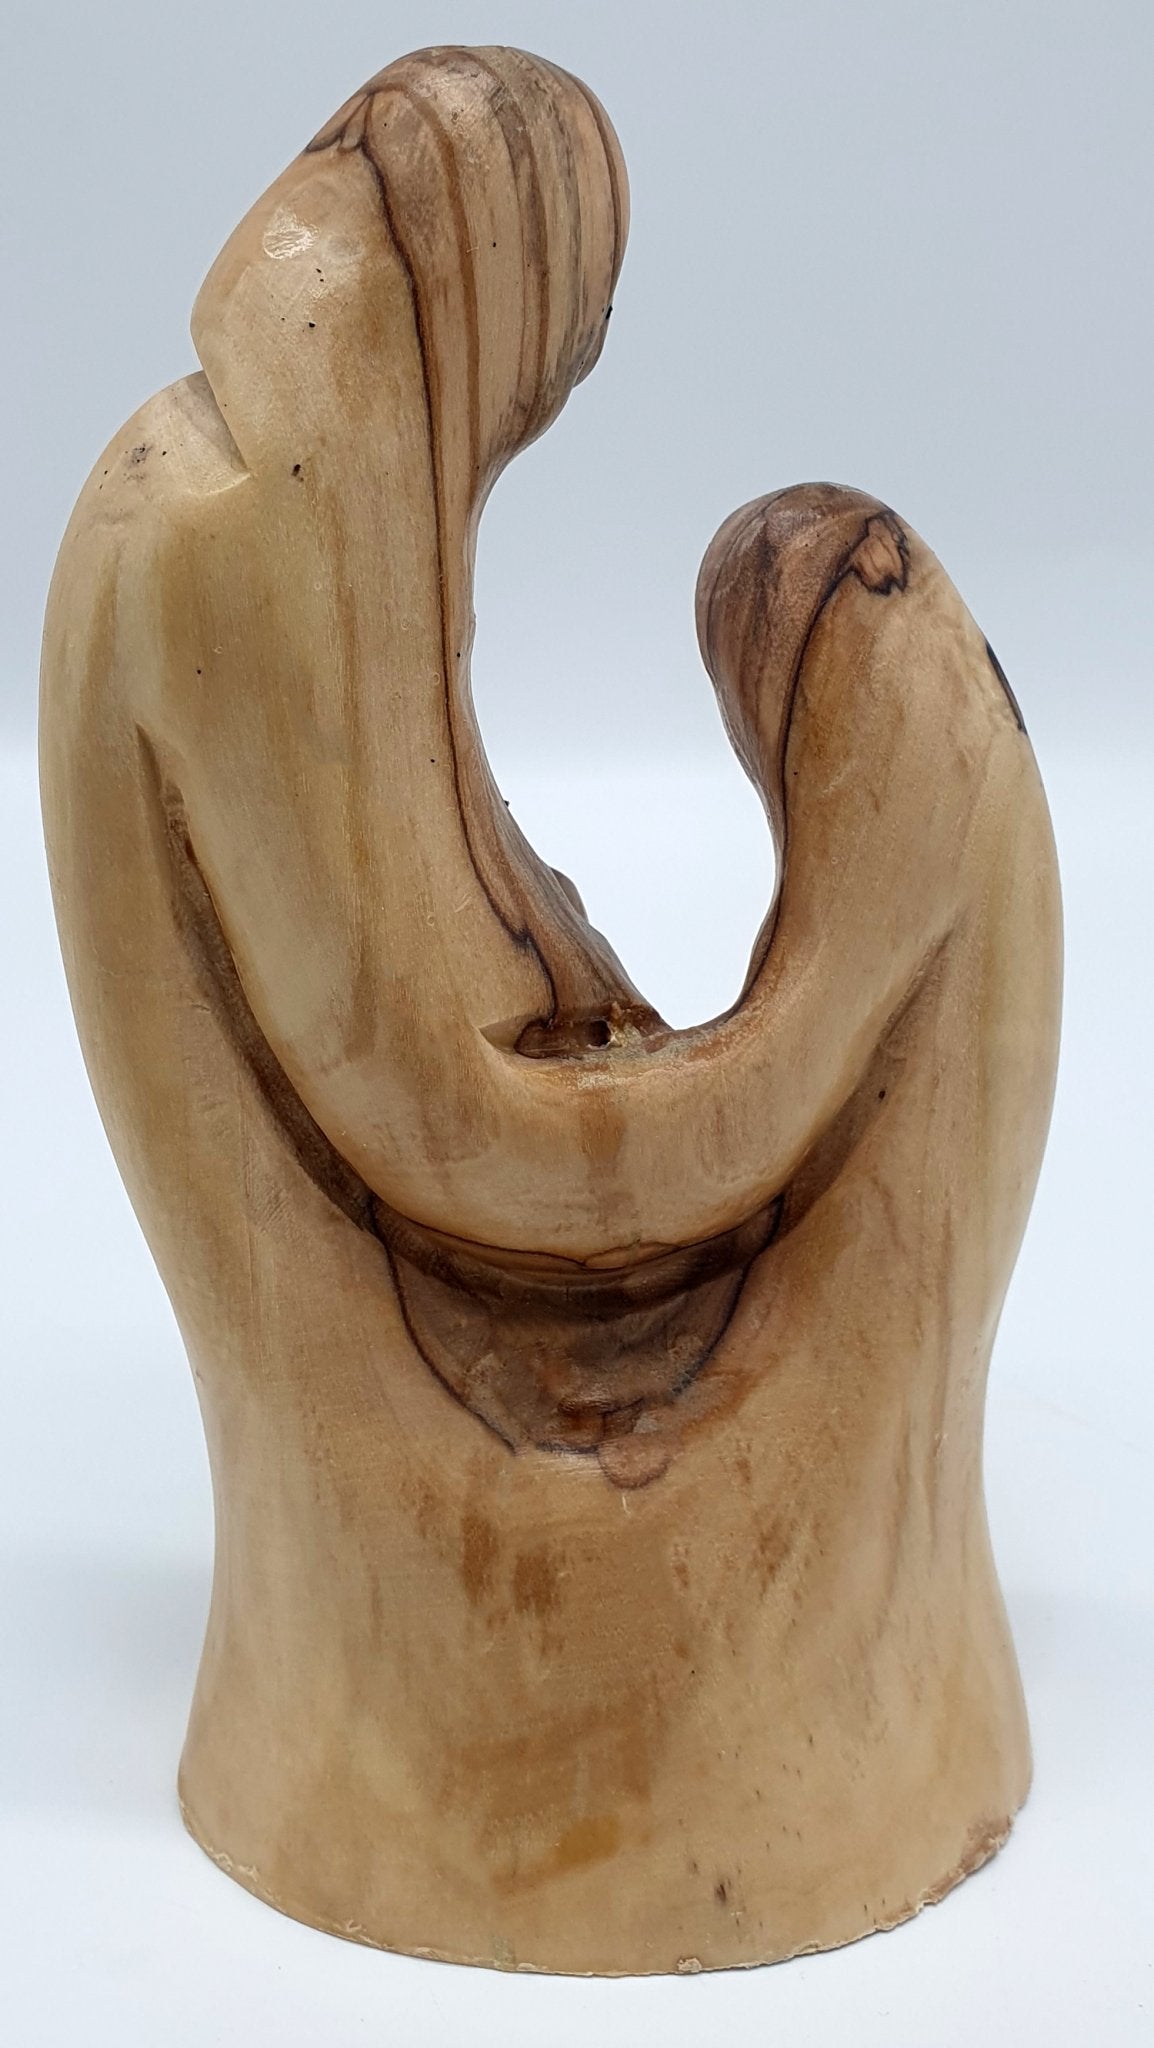 Sacred Elegance: Zuluf Hand-Carved Olive Wood Holy Family Statue from Bethlehem - Zuluf